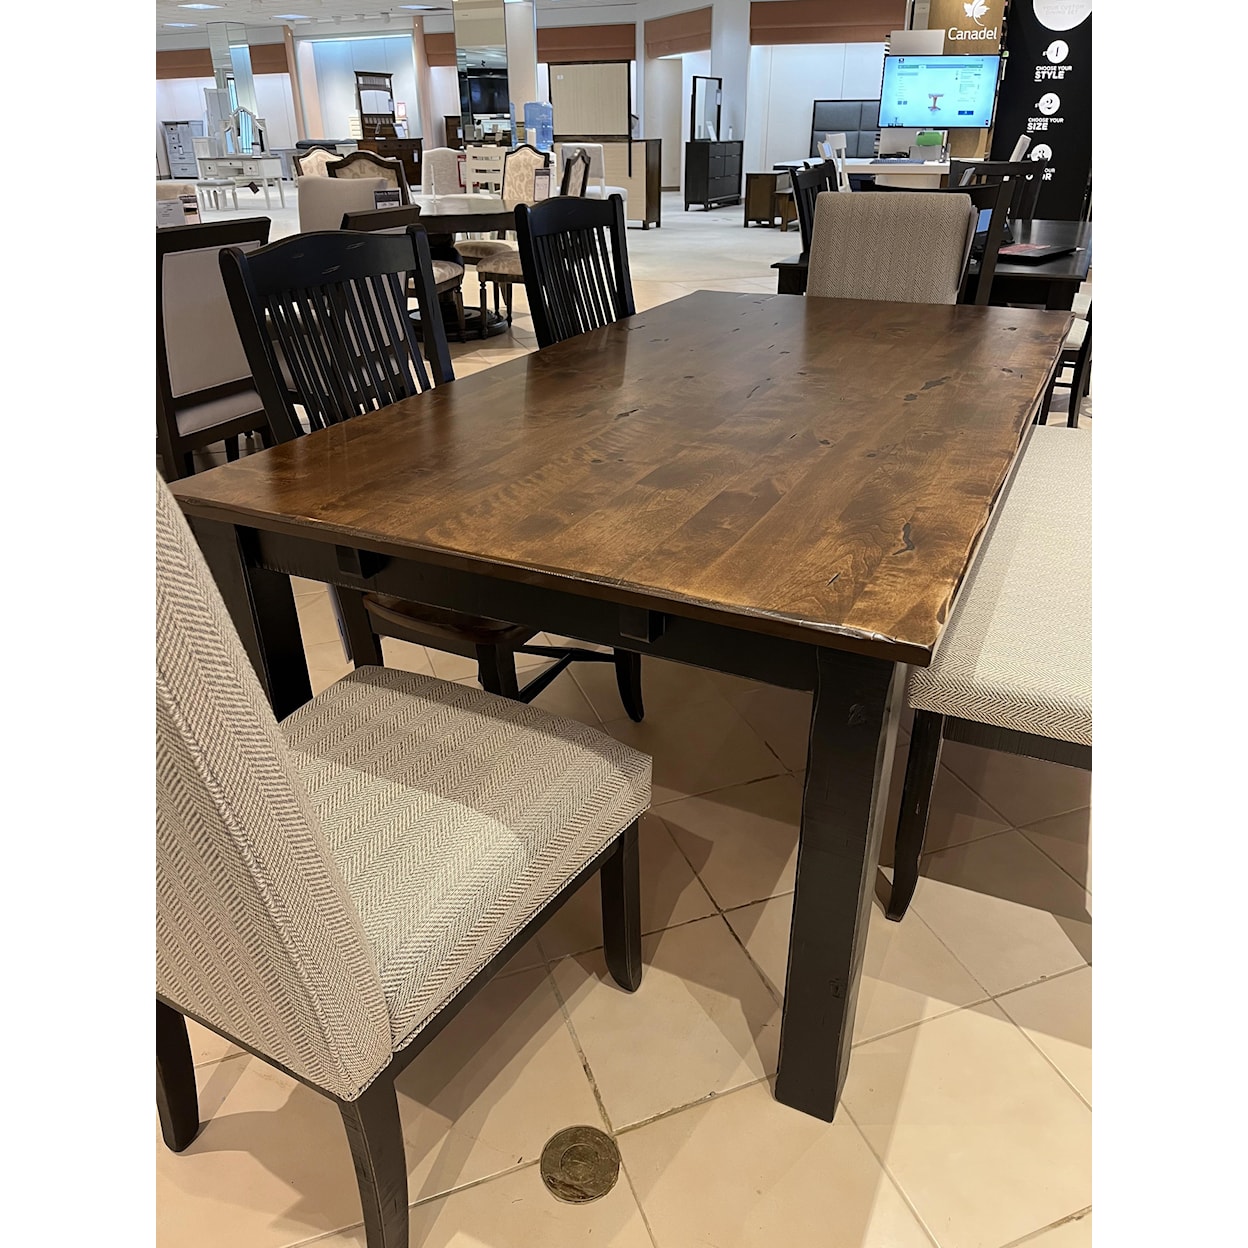 Canadel Champlain Champlain Dining Table